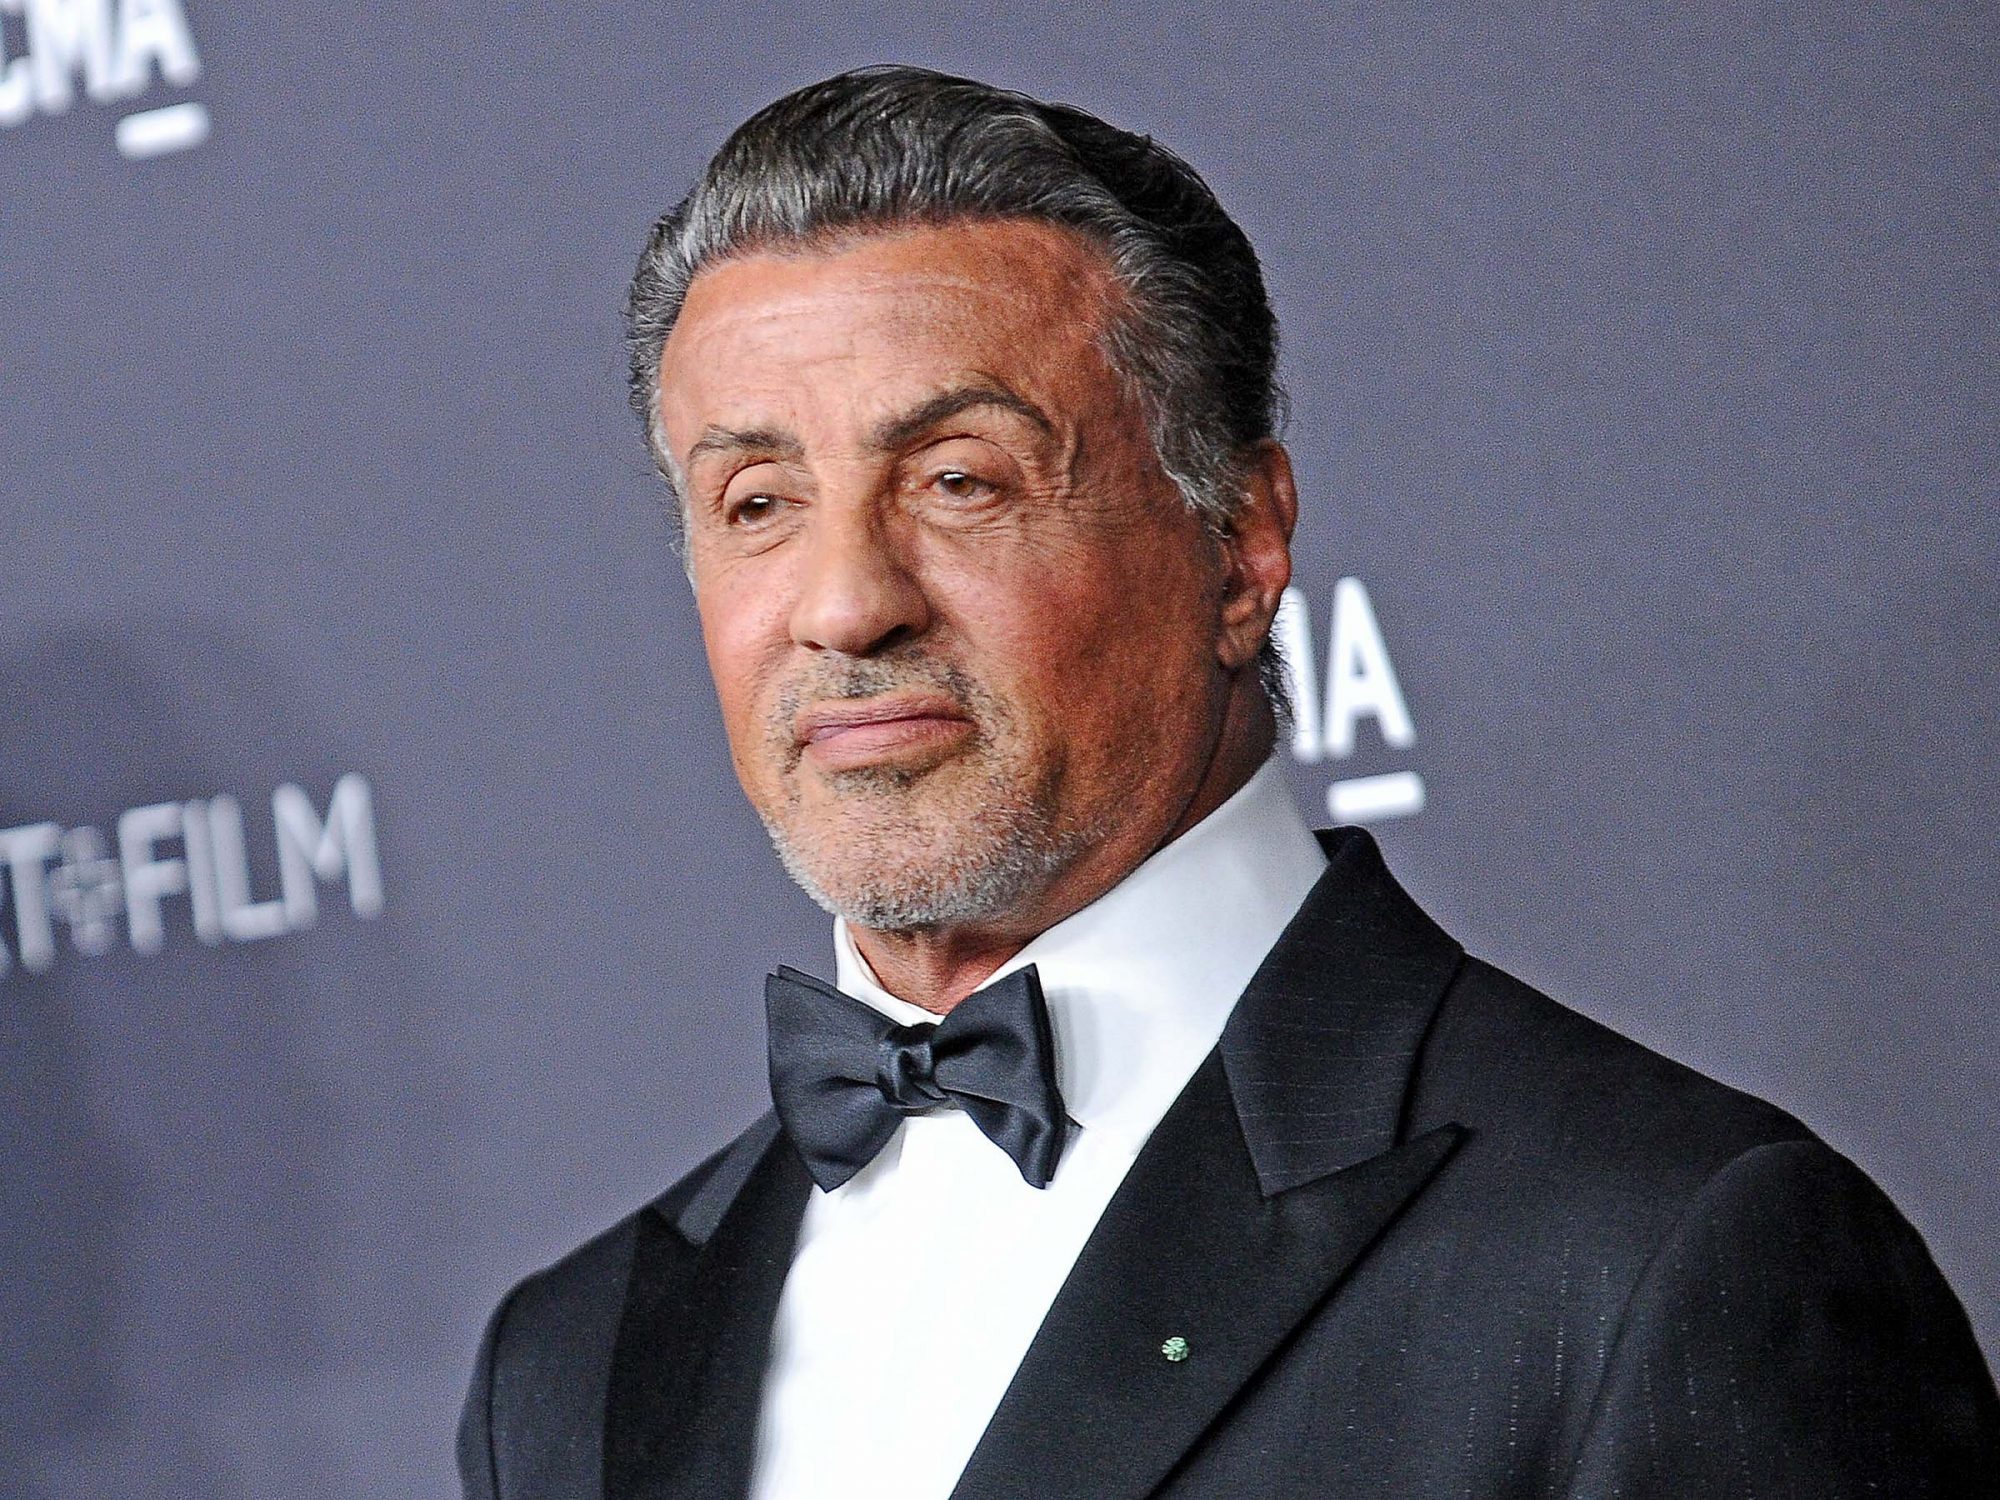 Sylvester Stallone wearing a suit